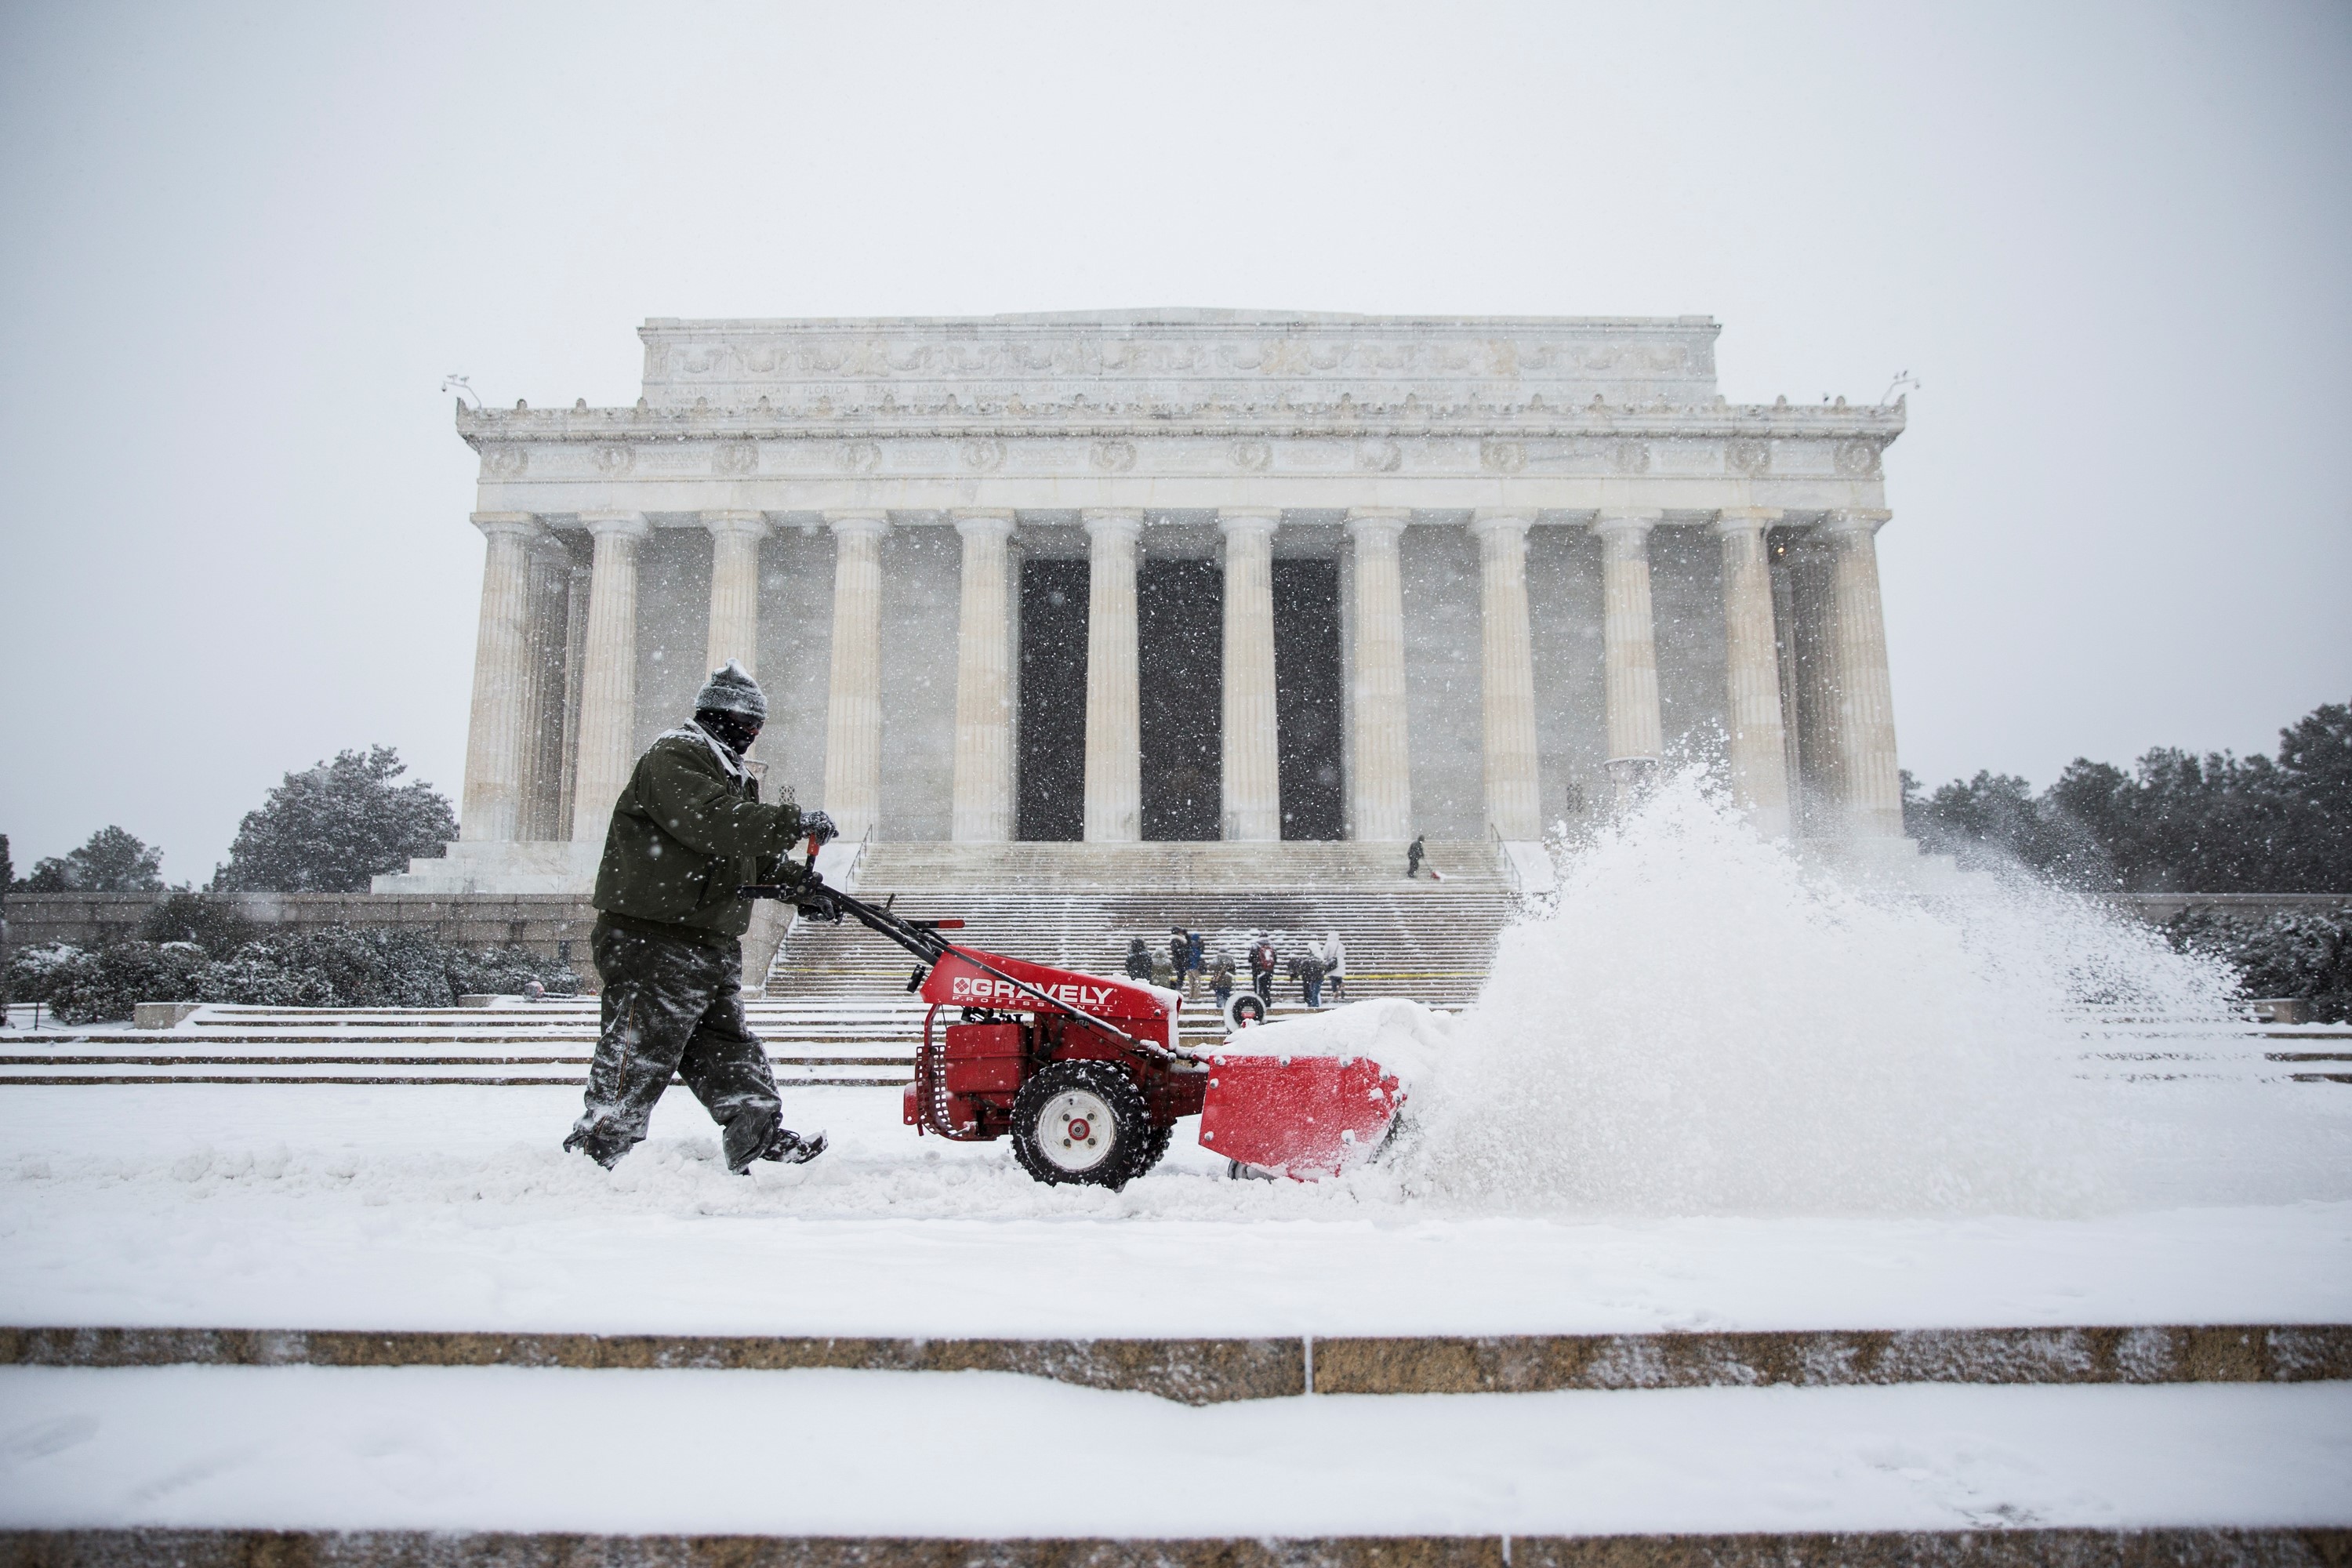 A worker clears snow from the steps of the Lincoln Memorial in Washington, DC on January 22, 2015.